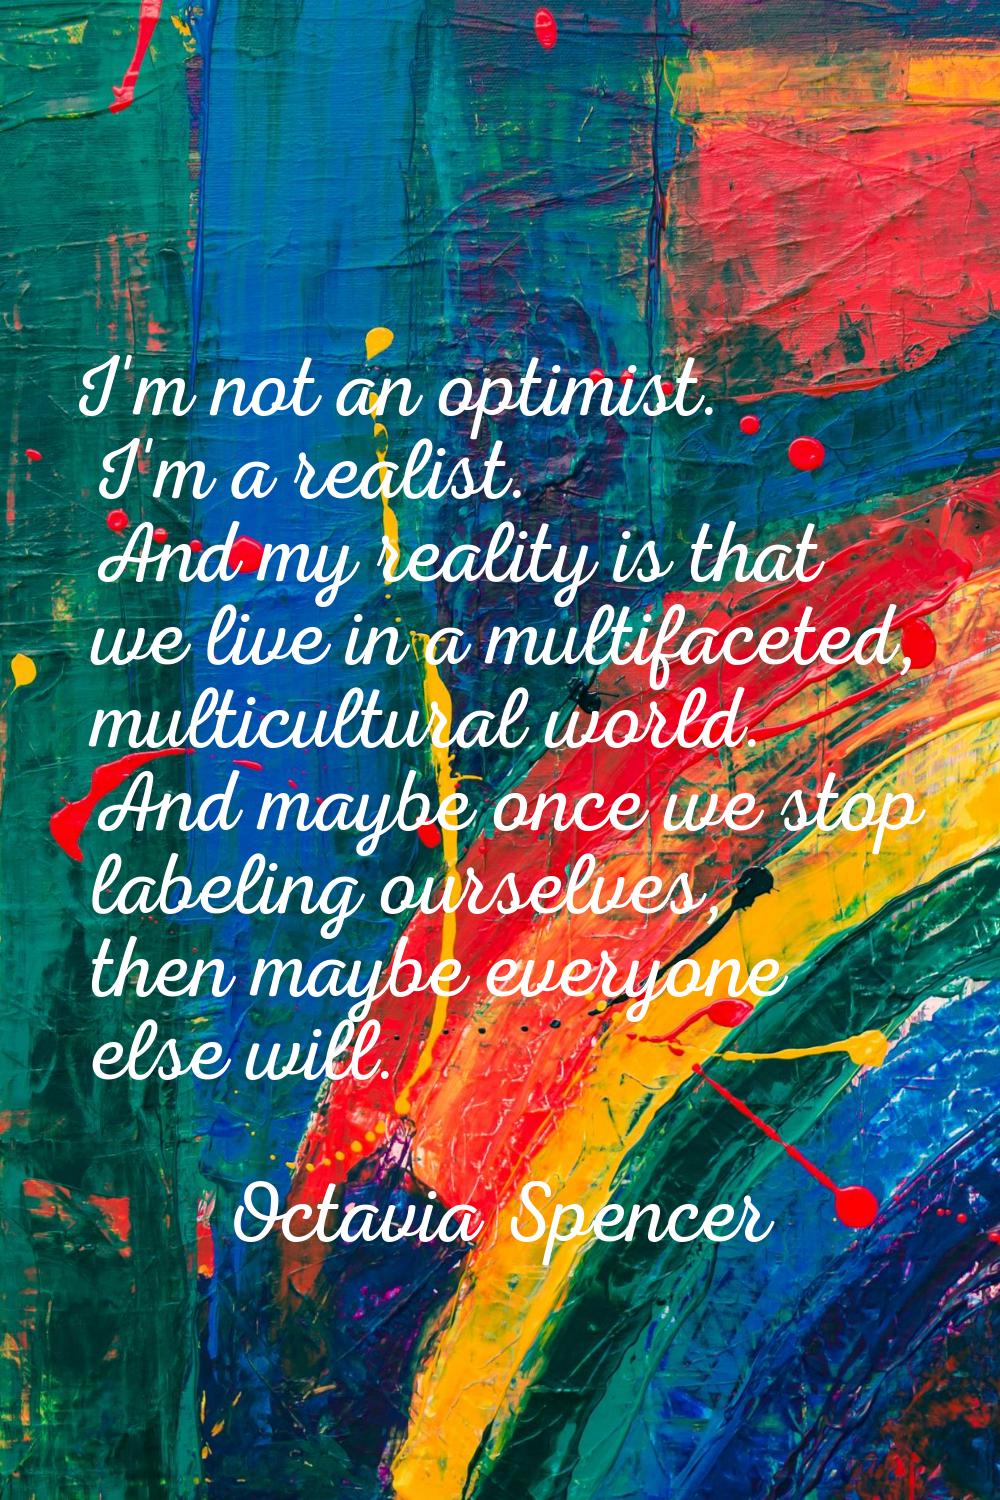 I'm not an optimist. I'm a realist. And my reality is that we live in a multifaceted, multicultural